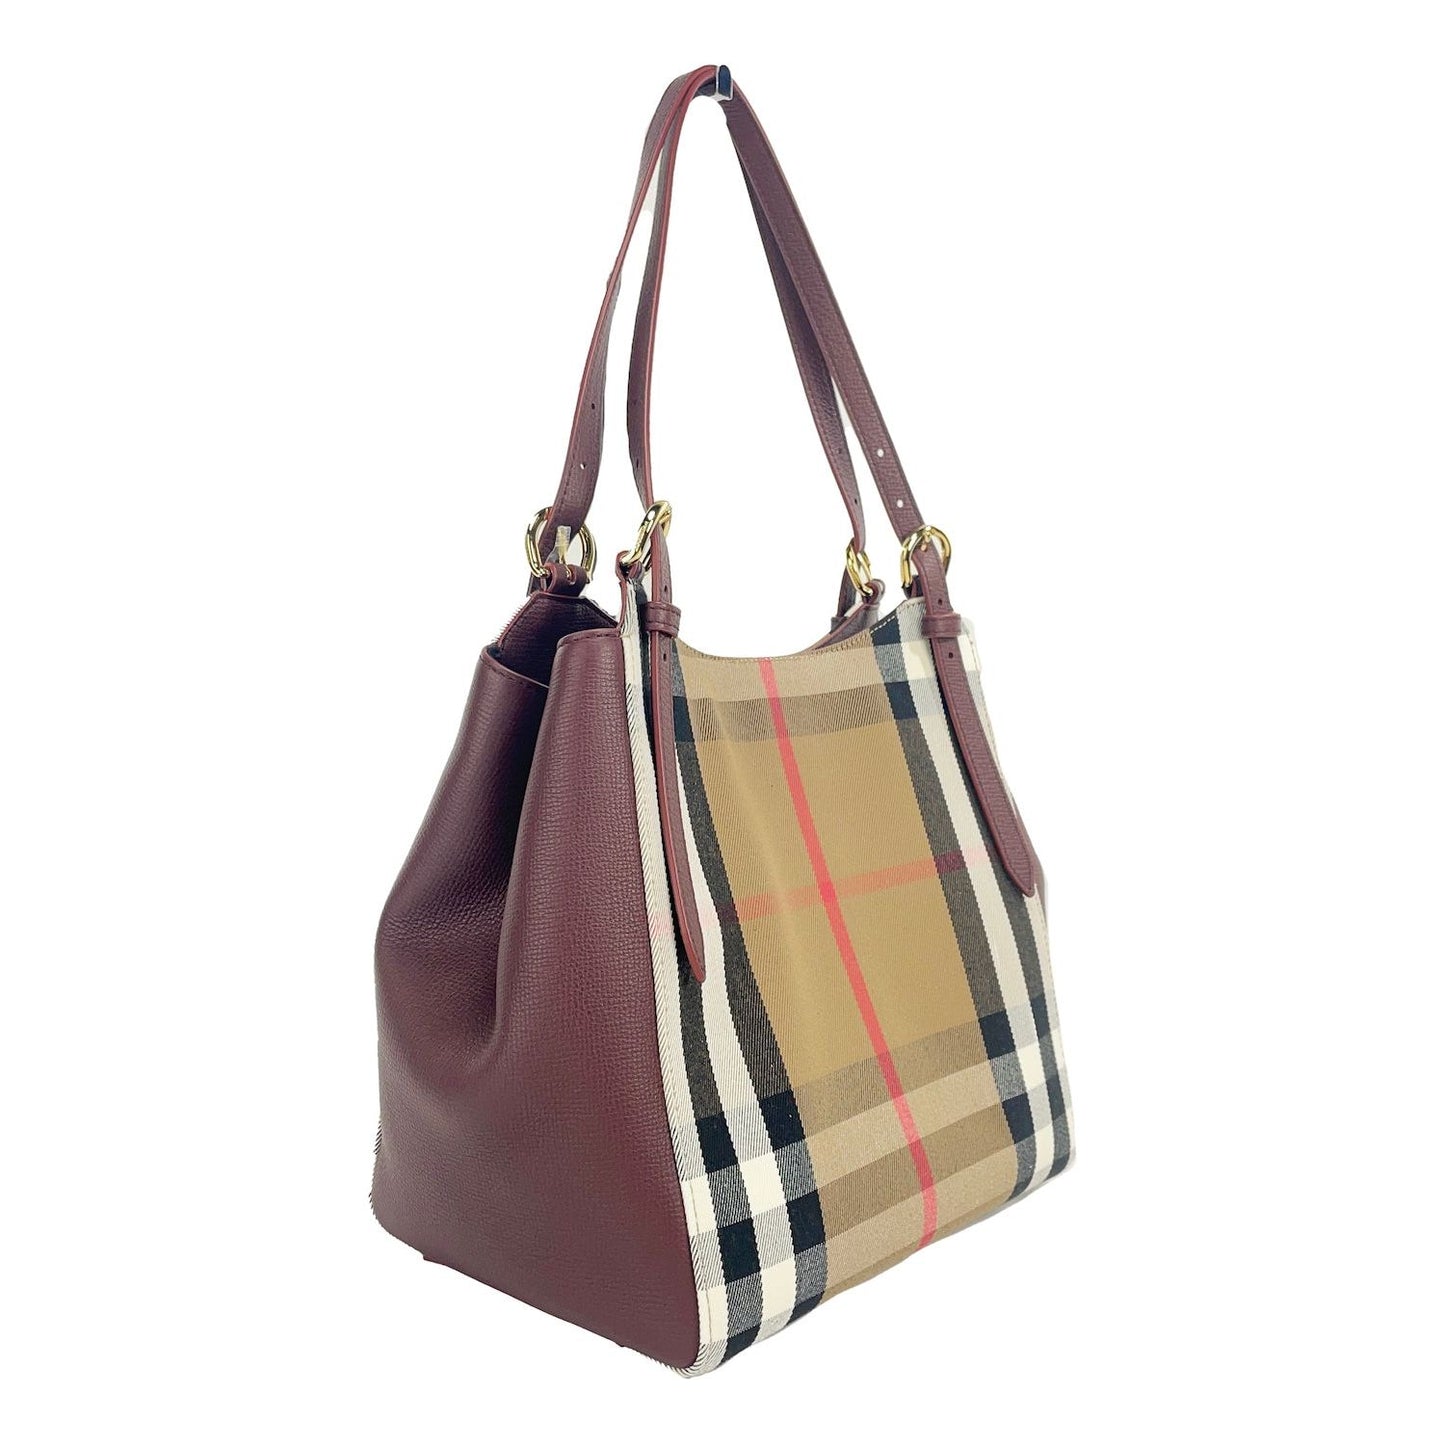 Burberry Small Canterby Mahogany Leather Check Canvas Tote Bag Purse small-canterby-mahogany-leather-check-canvas-tote-bag-purse